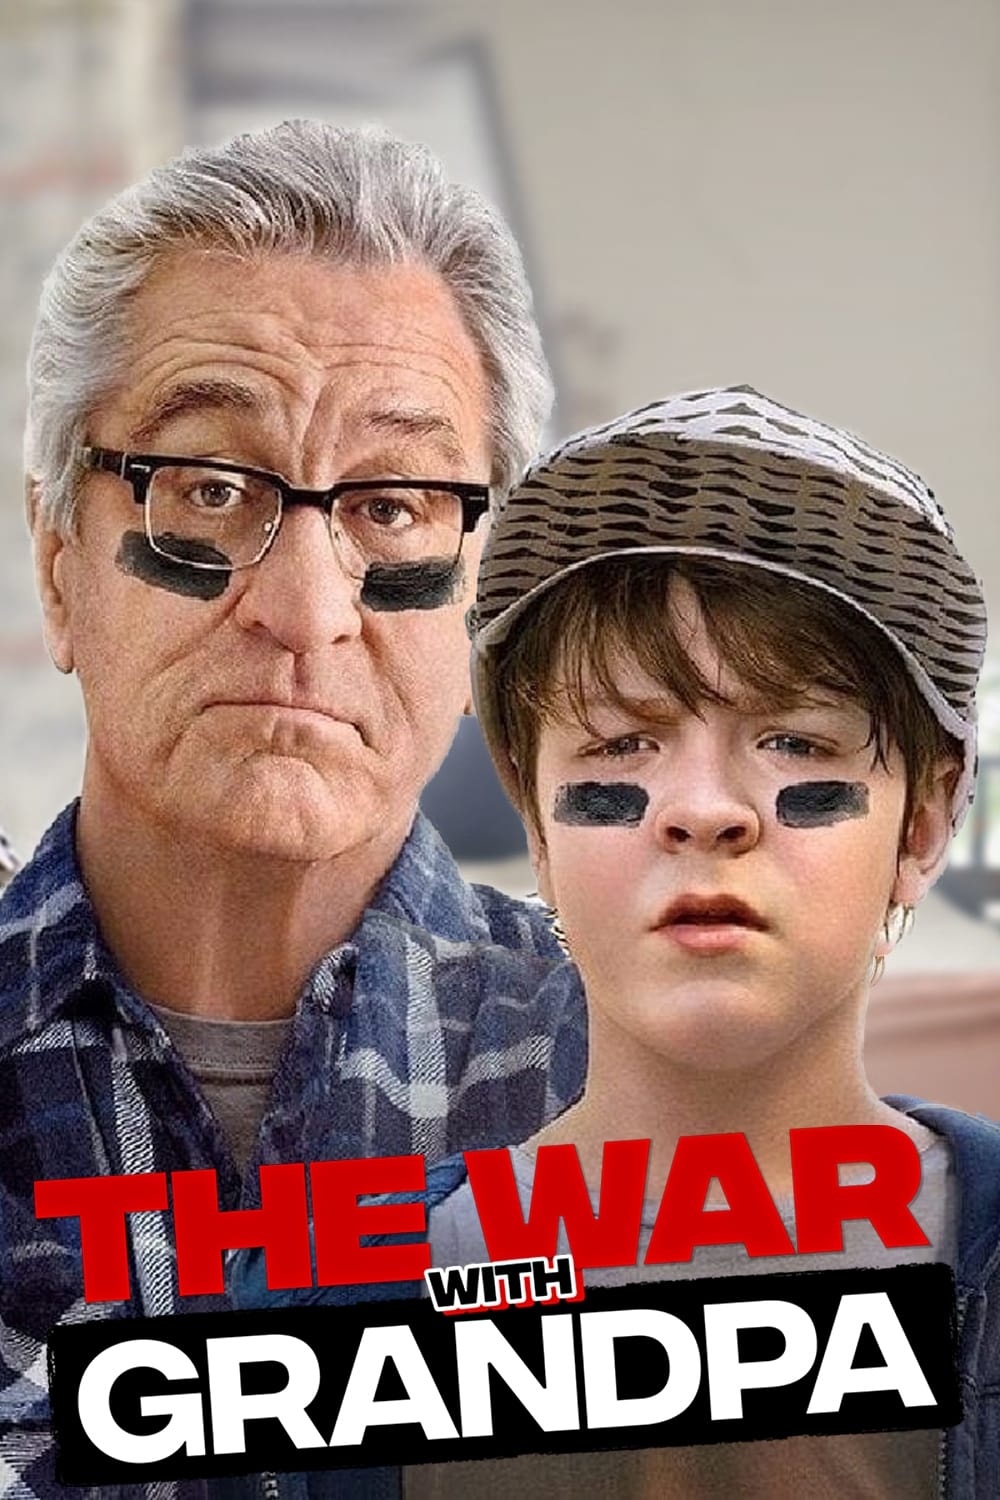 movie review the war with grandpa